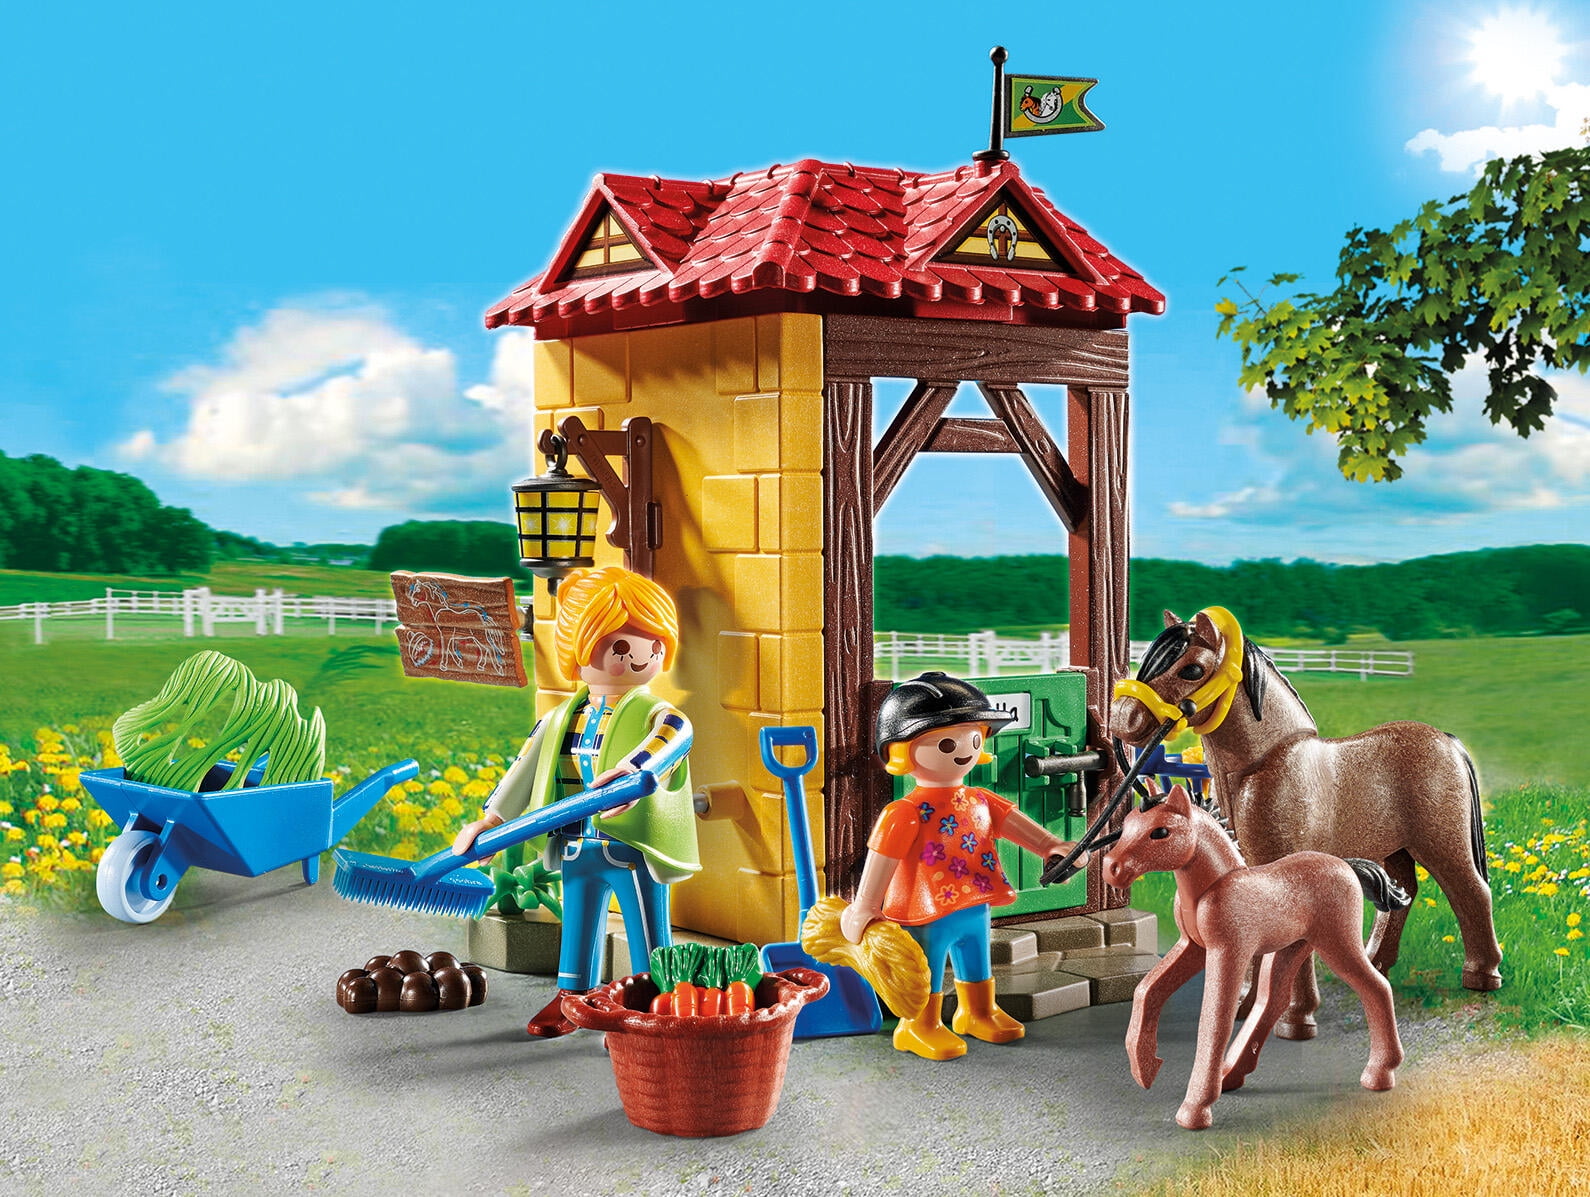 Playmobil @ @ @ @ character child @ @ @ @ farm house @ @ @ @ western town @ @ 83 